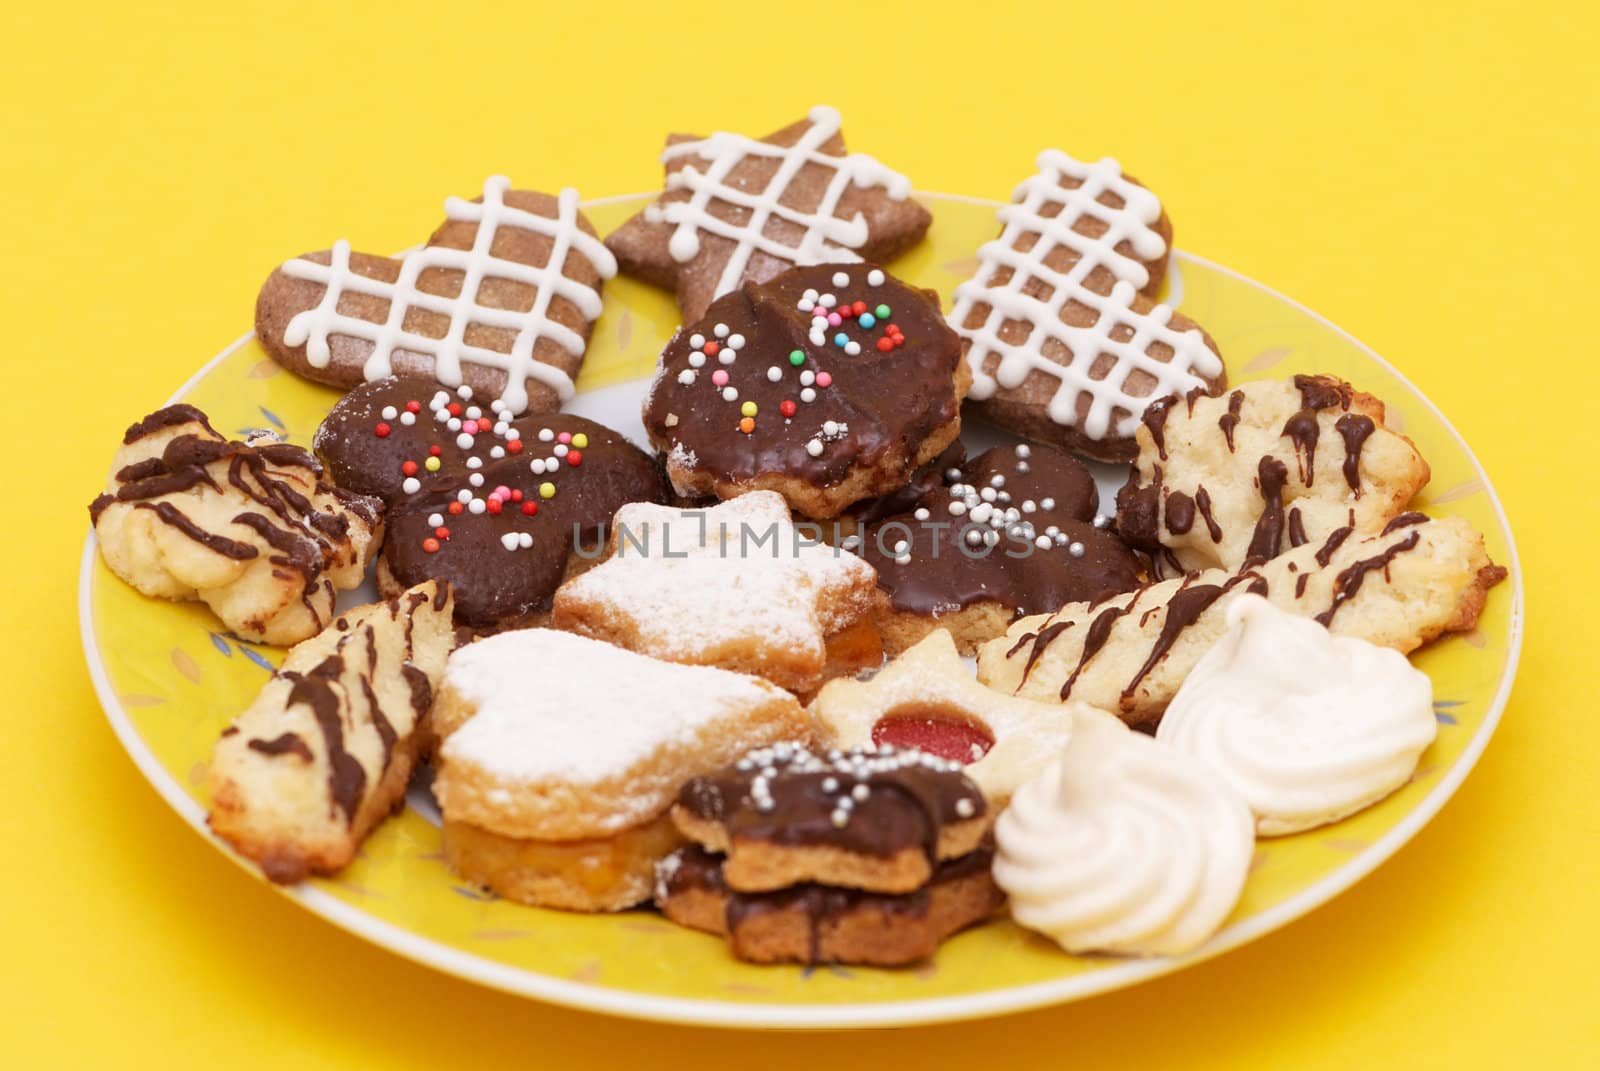 A group of Christmas cakes on yellow plate and yellow background